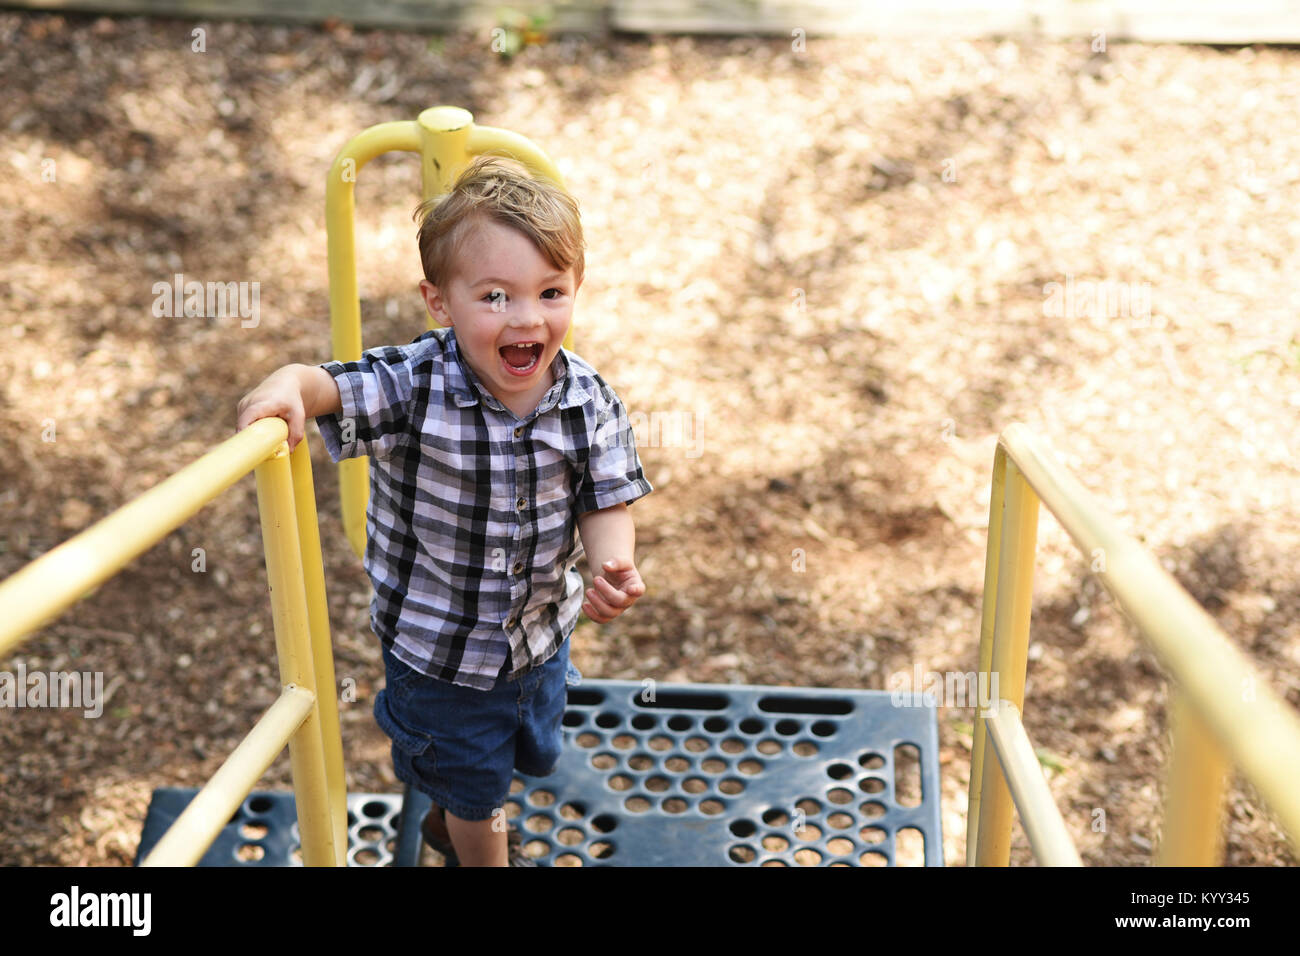 High angle view of playful boy shouting while standing on outdoor play equipment at playground Stock Photo